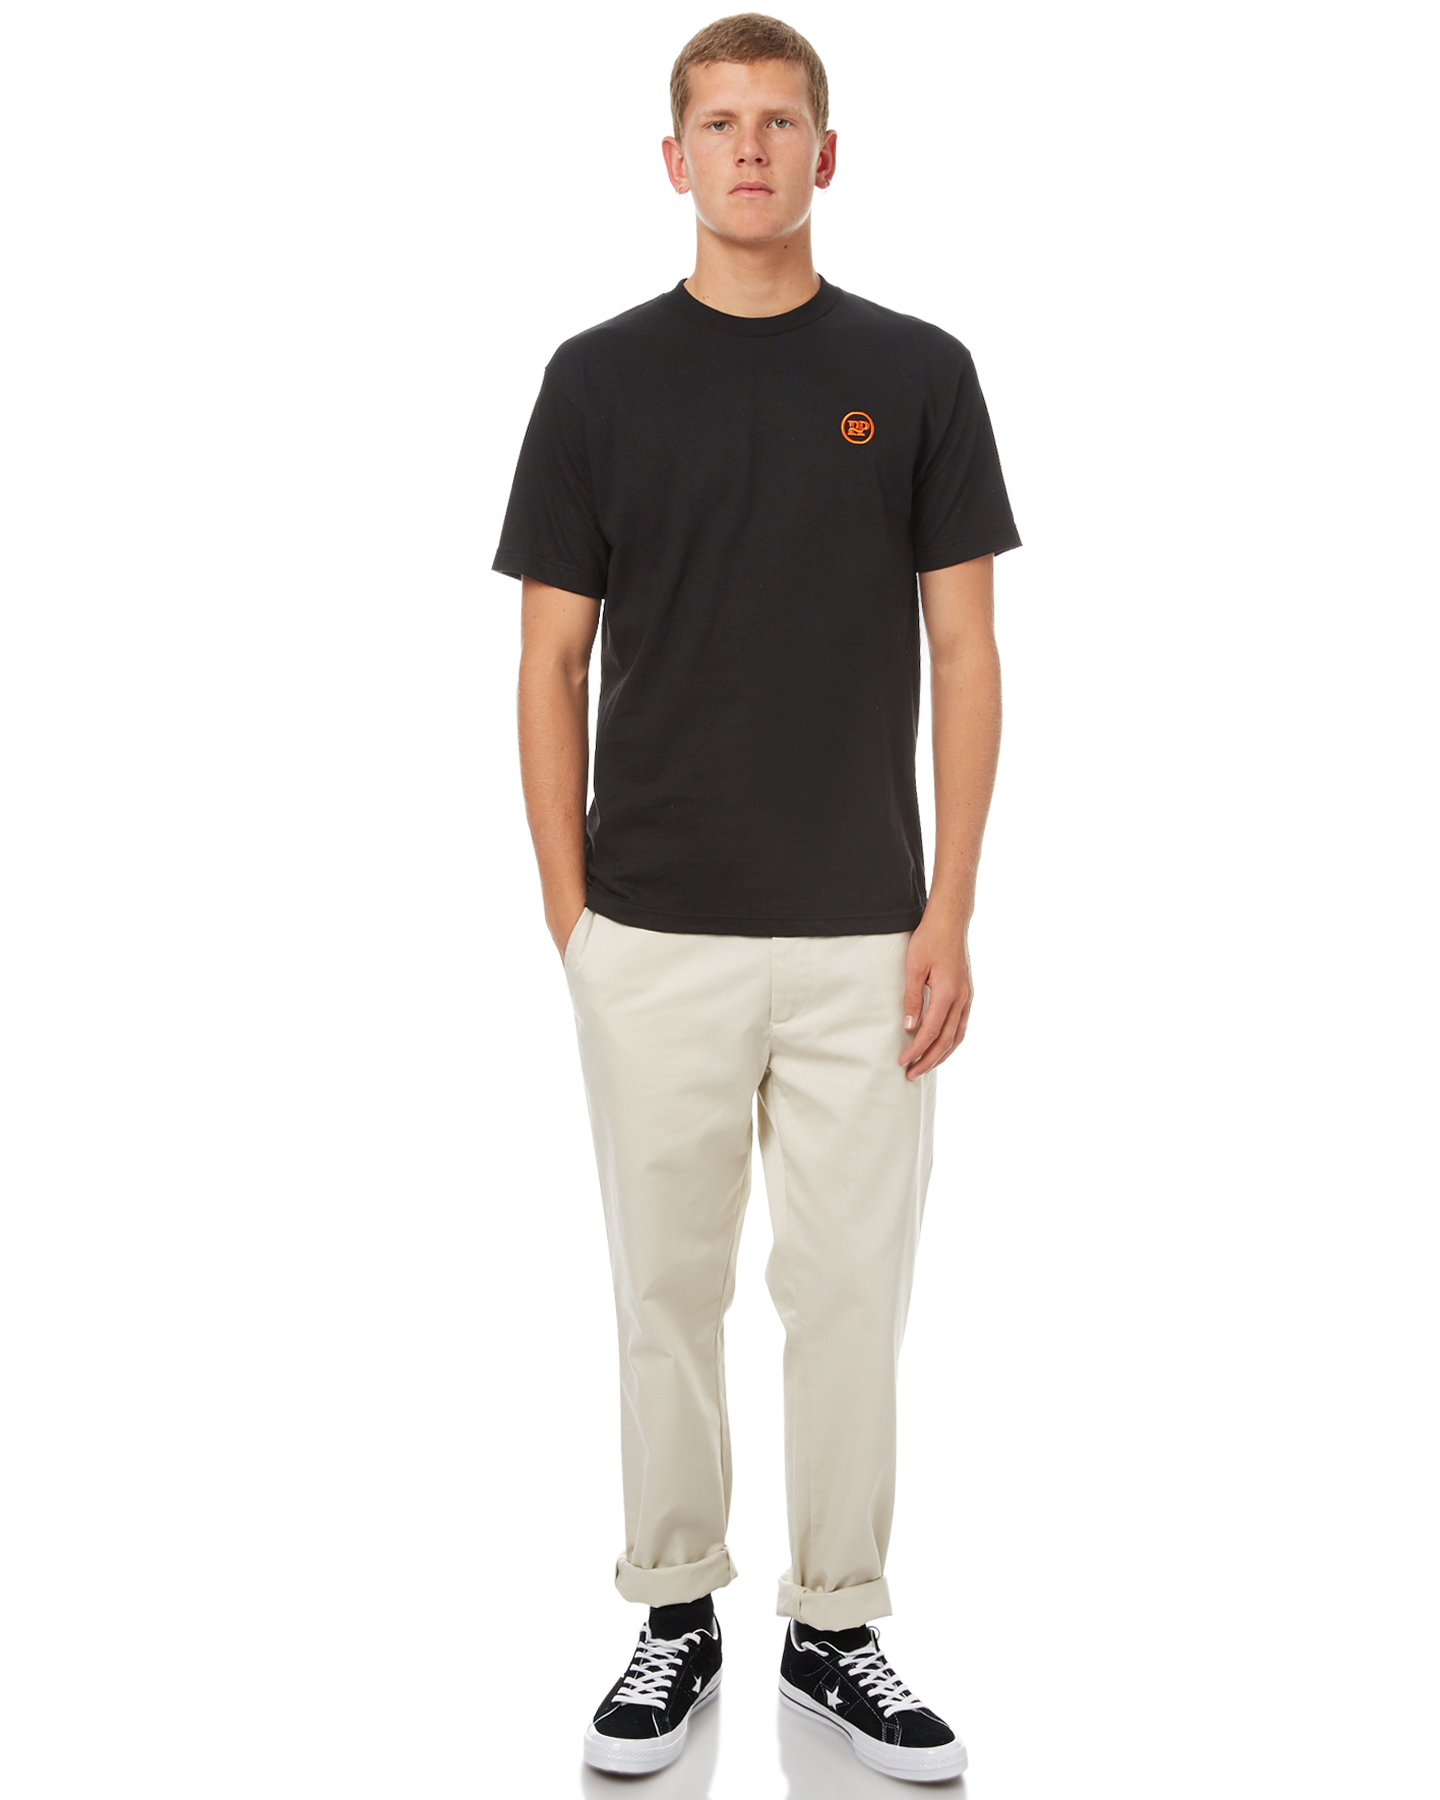 Pass Port Pp Works Embroid Mens Tee - Black | SurfStitch